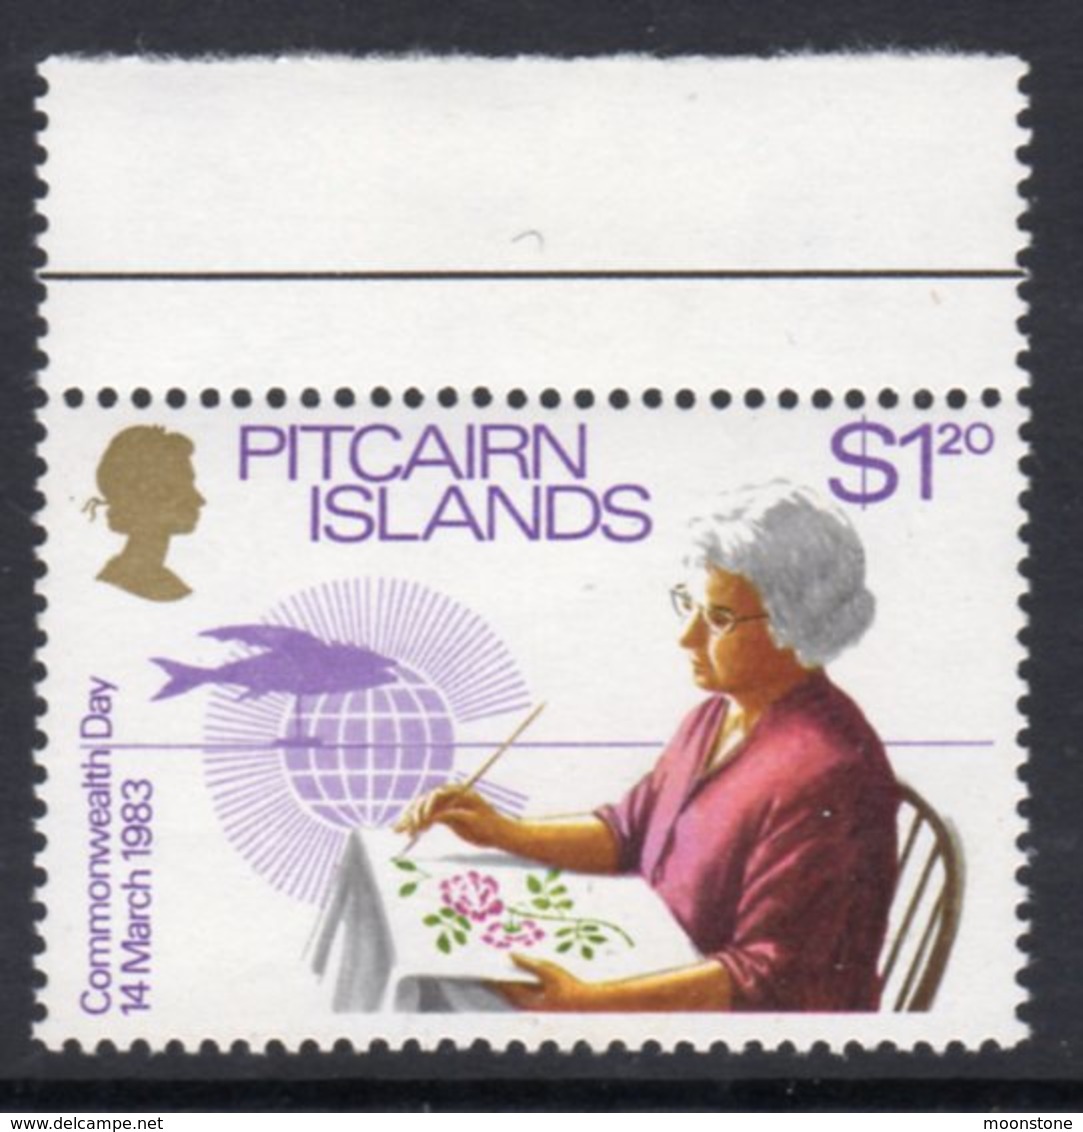 Pitcairn QEII 1983 Commonwealth Day $1.20 Value, Wmk. Crown To Right Of CA, MNH, SG 237w - Pitcairn Islands